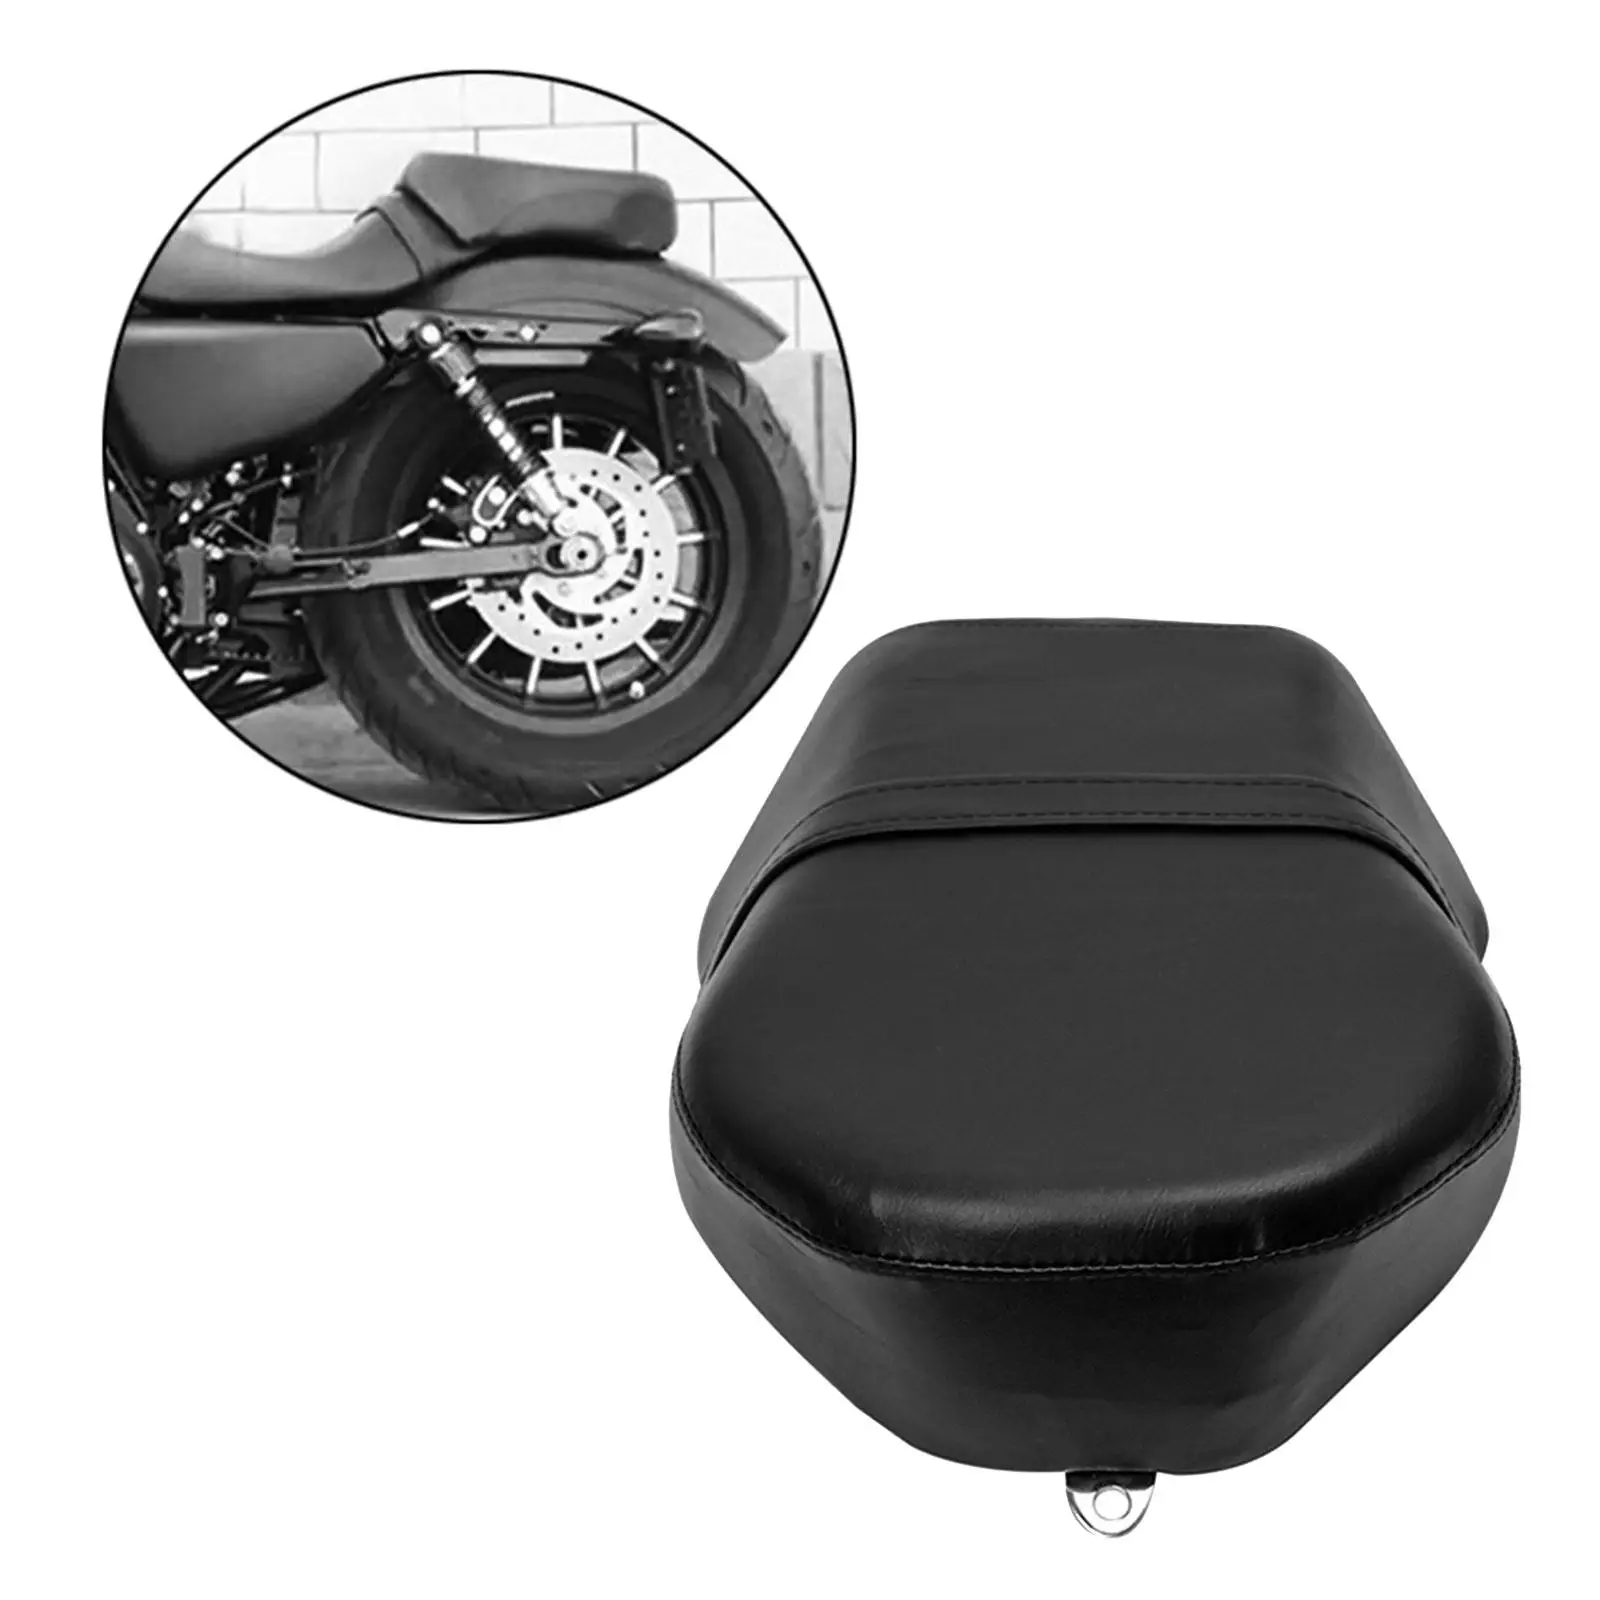 Motorcycle Pillion Passenger Pad Black for Harley Sportster Spare Parts